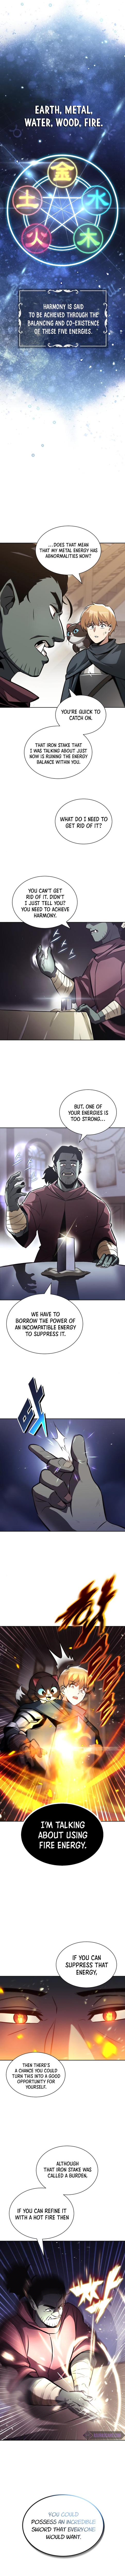 Reformation of the Deadbeat Noble - Chapter 46 Page 6